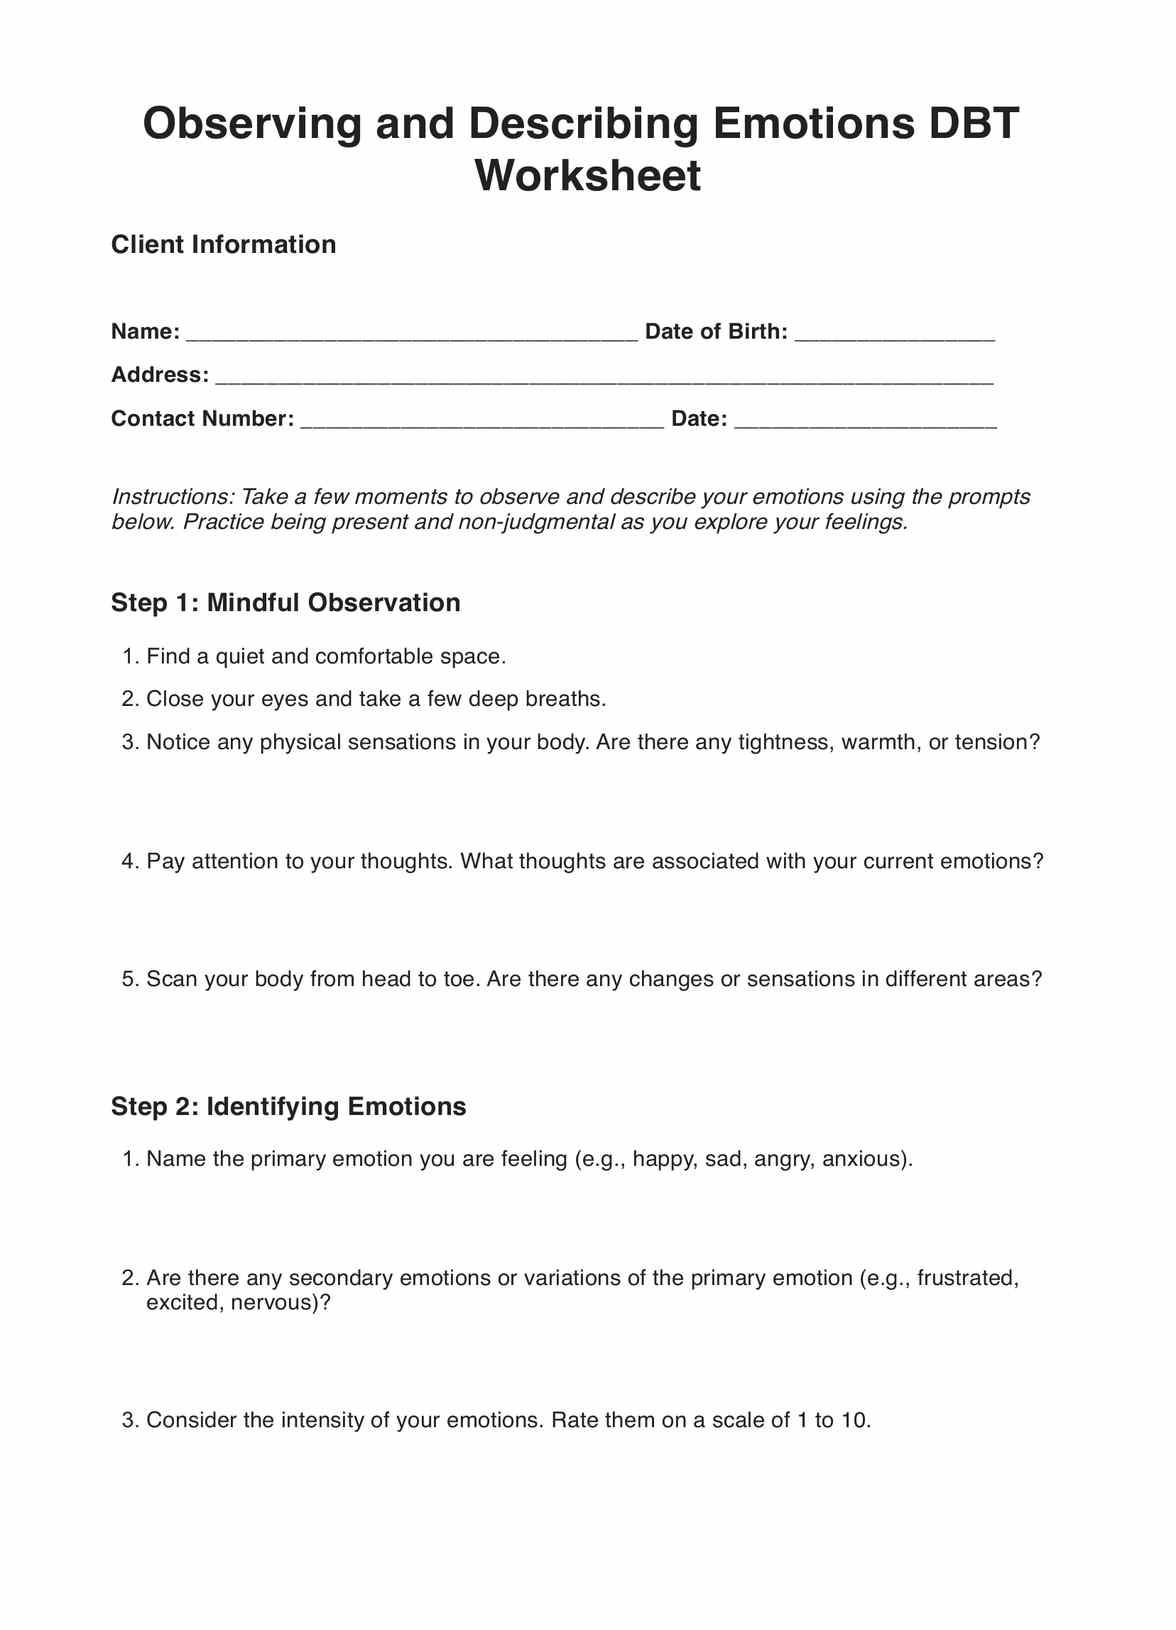 Observing and Describing Emotions DBT Worksheet PDF Example